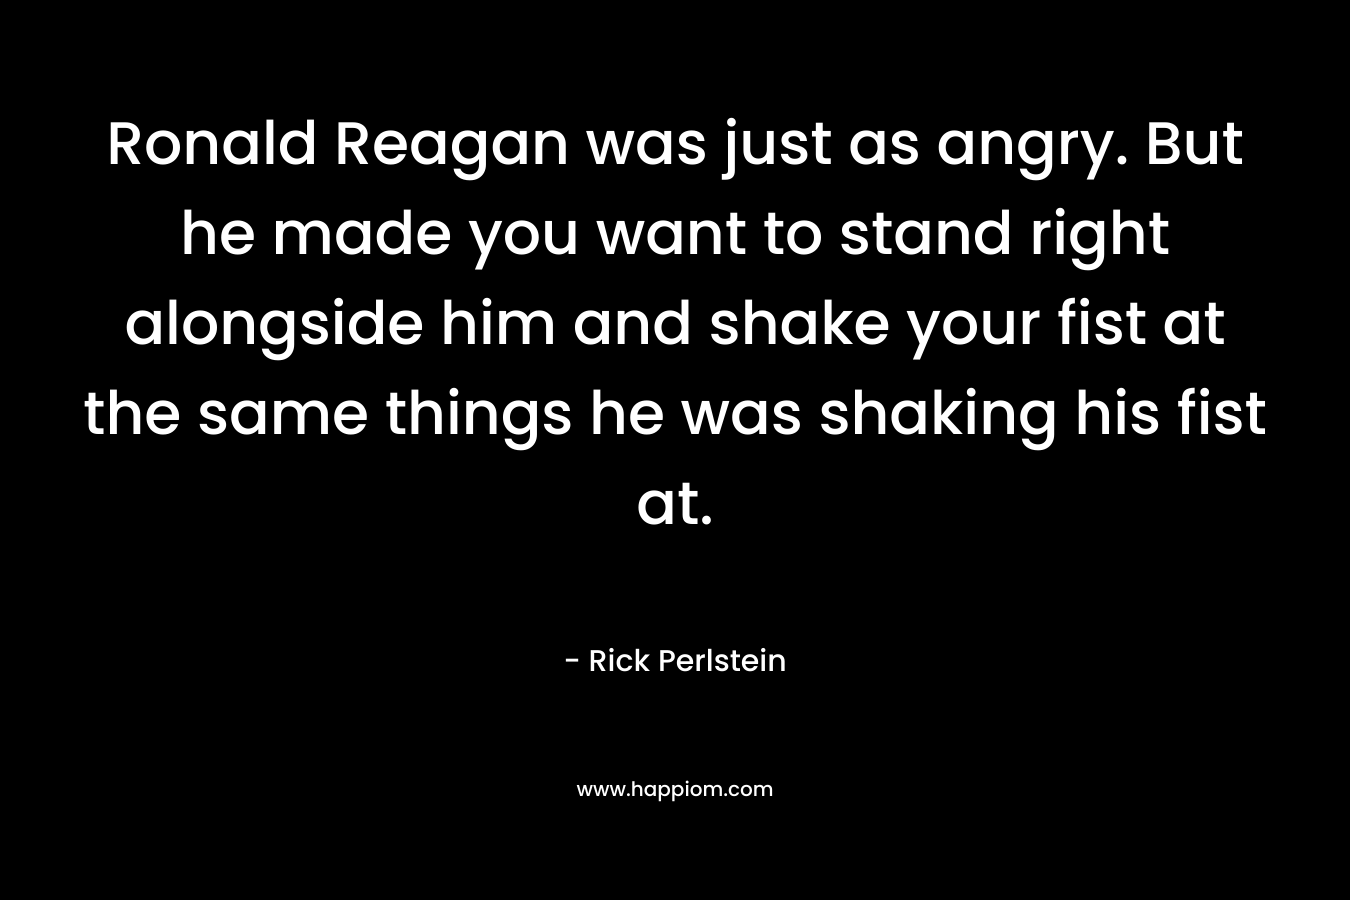 Ronald Reagan was just as angry. But he made you want to stand right alongside him and shake your fist at the same things he was shaking his fist at. – Rick Perlstein